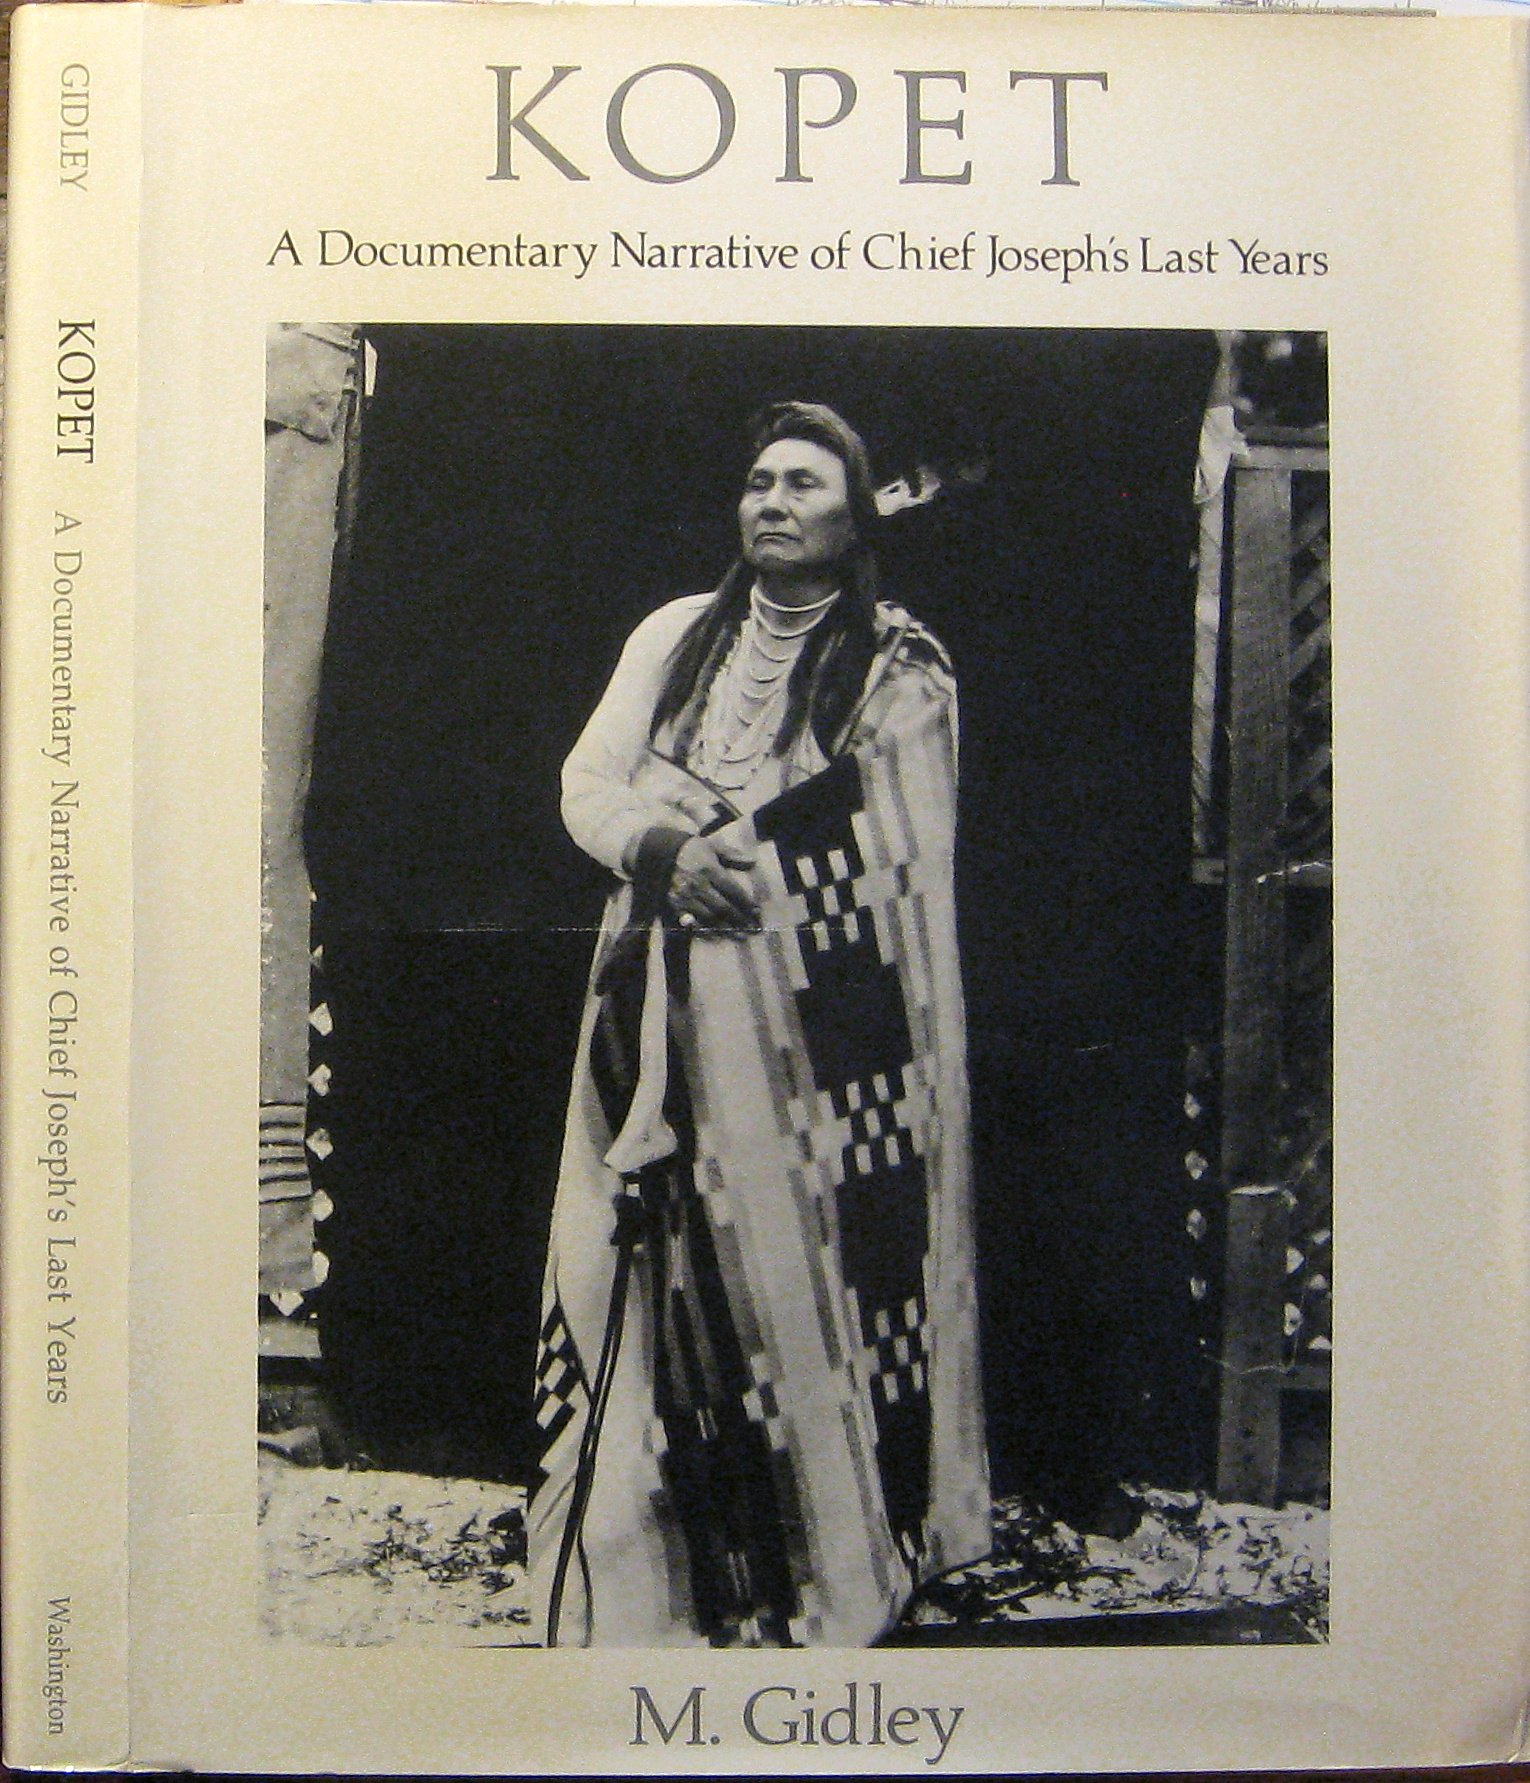 Kopet: A documentary narrative of Chief Joseph's last years (book cover)